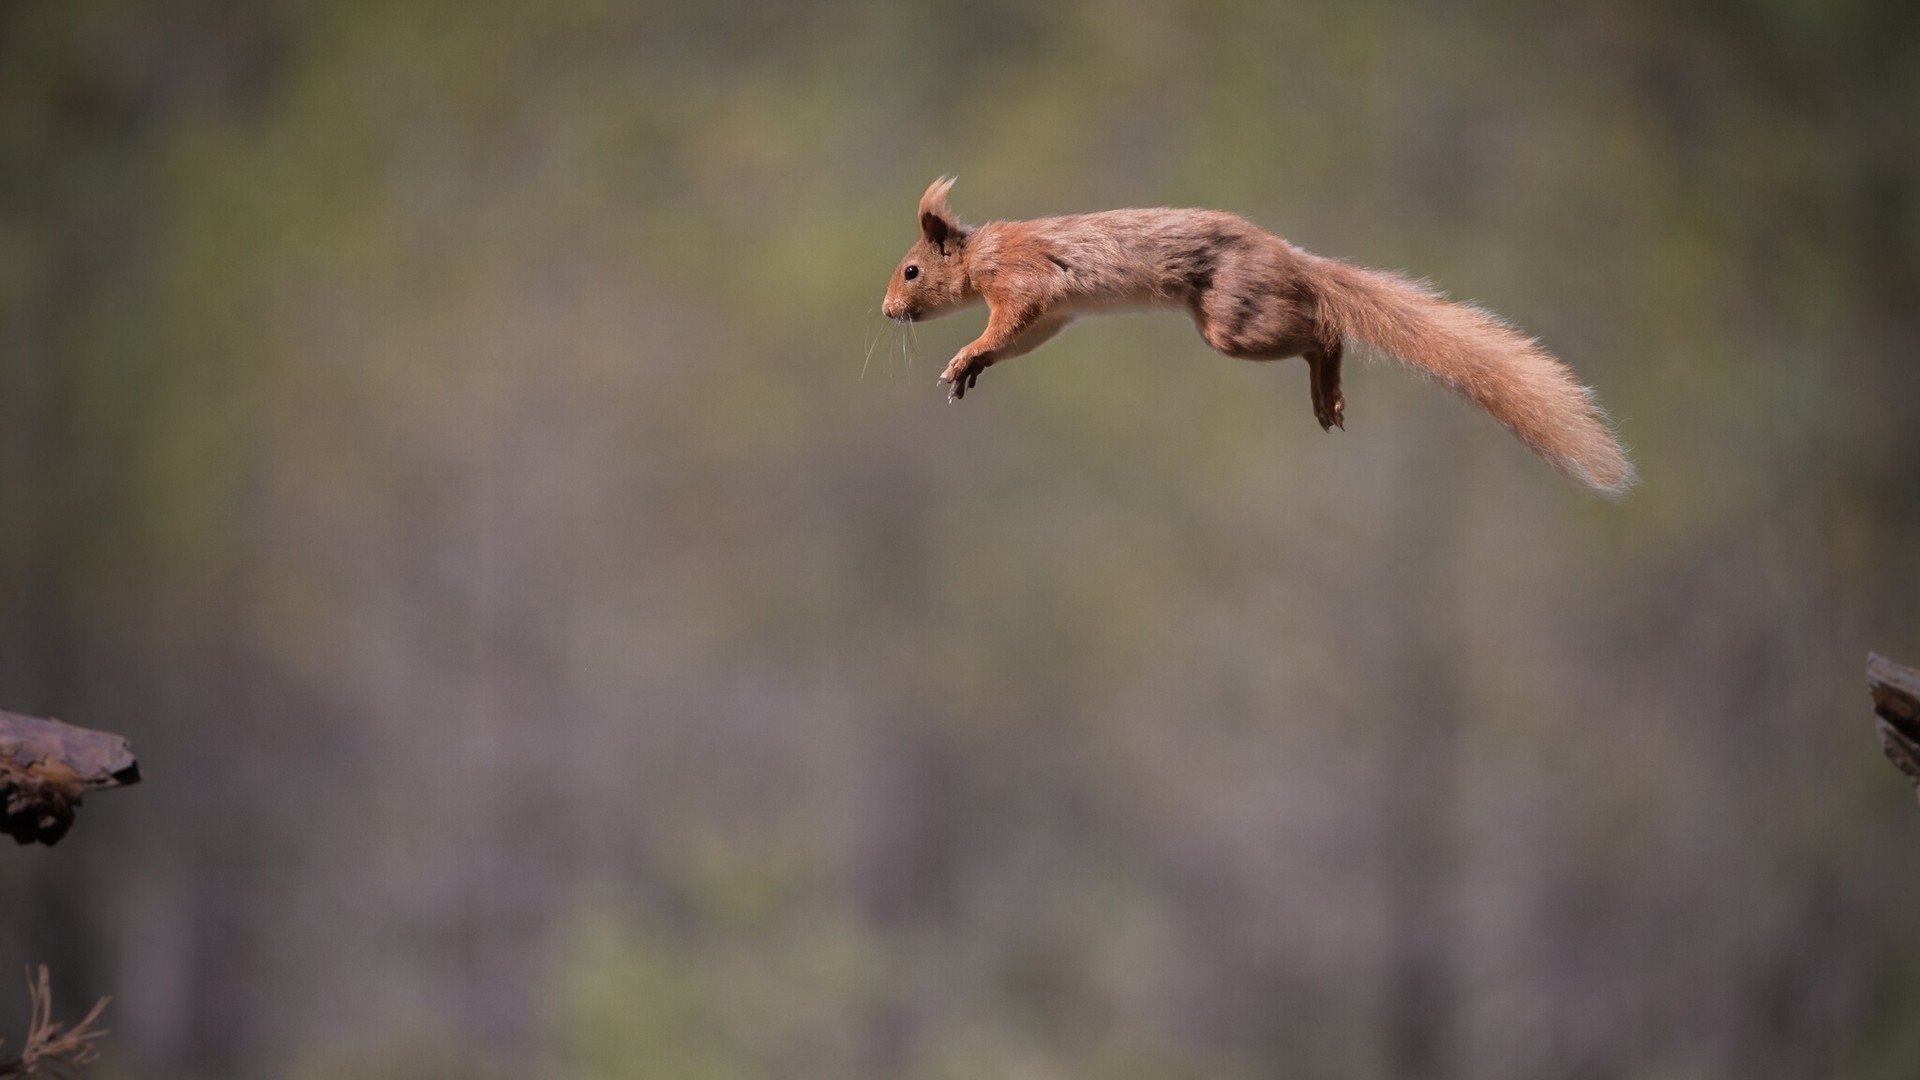 General 1920x1080 squirrel jumping animals blurred side view mammals outdoors